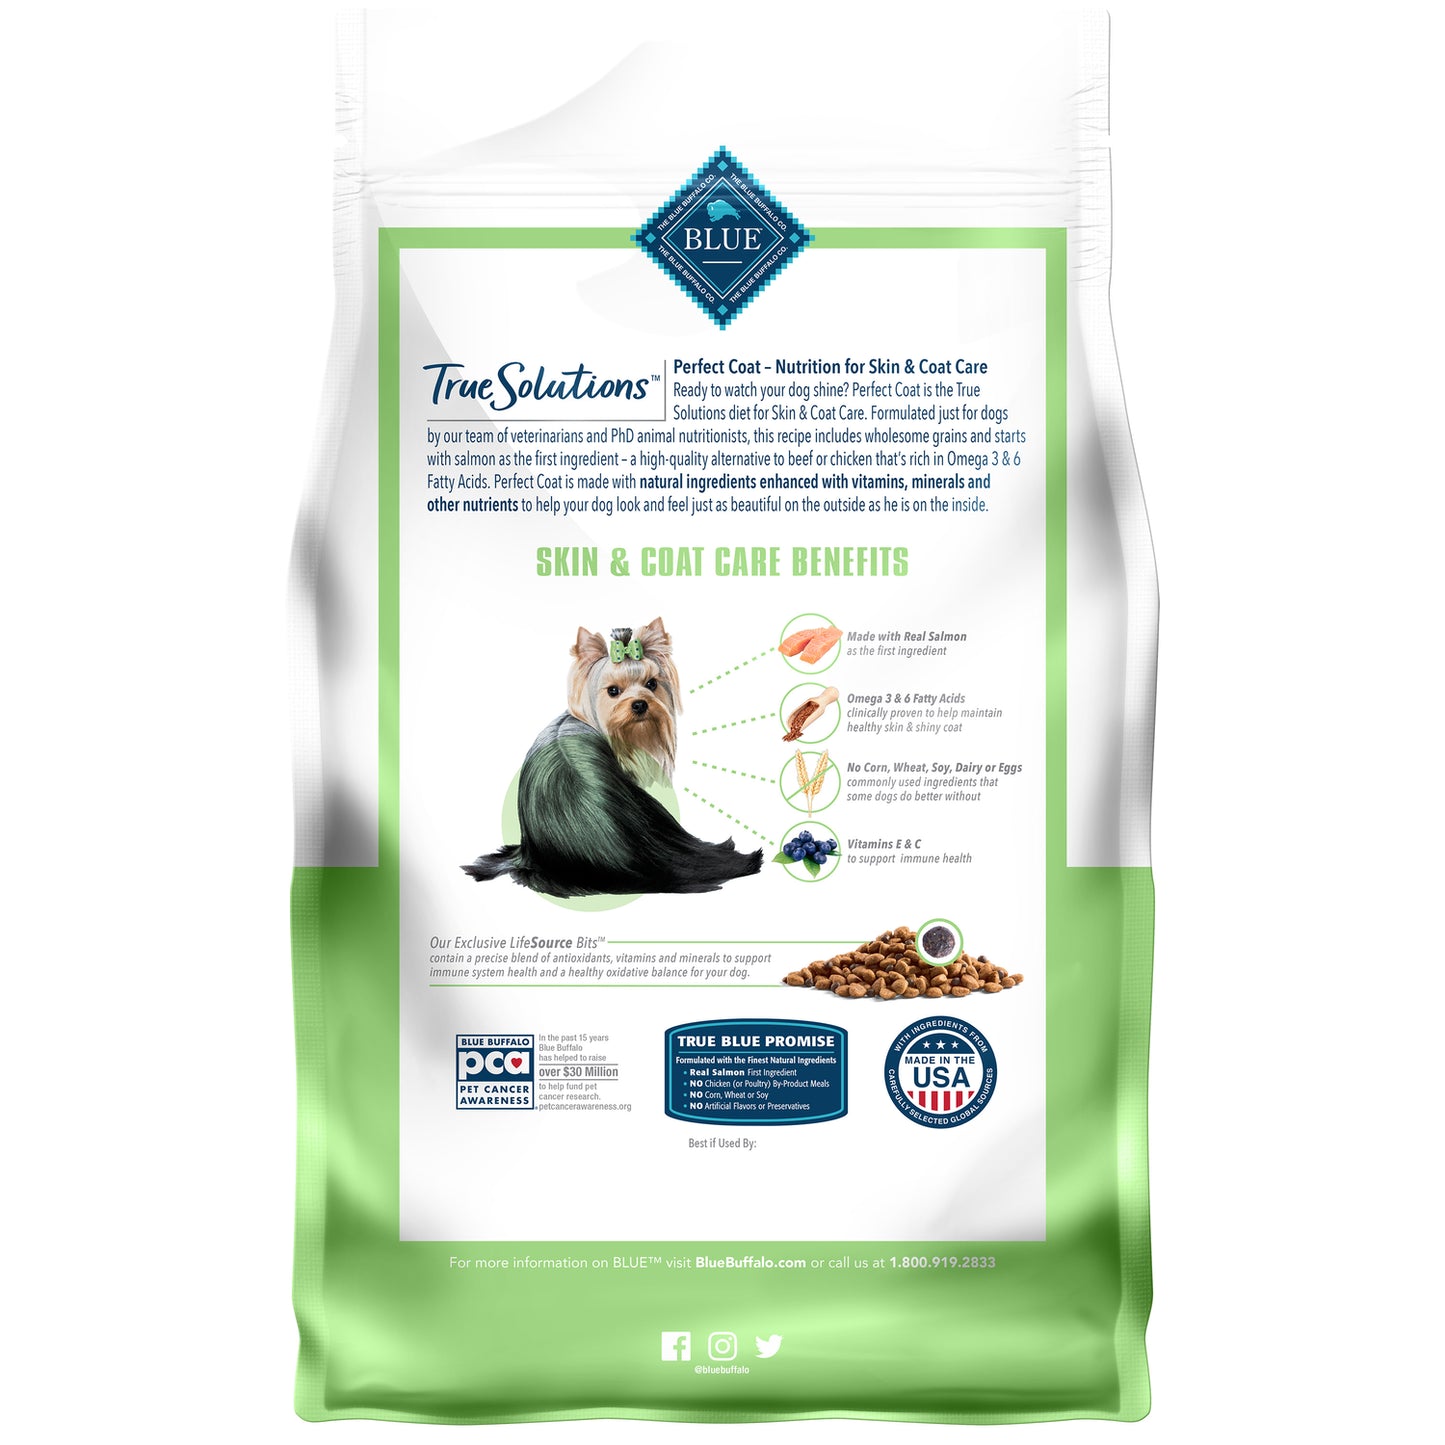 Blue Buffalo True Solutions Perfect Coat Skin & Coat Care Salmon Dry Dog Food for Adult Dogs, Whole Grain, 4 Lb. Bag